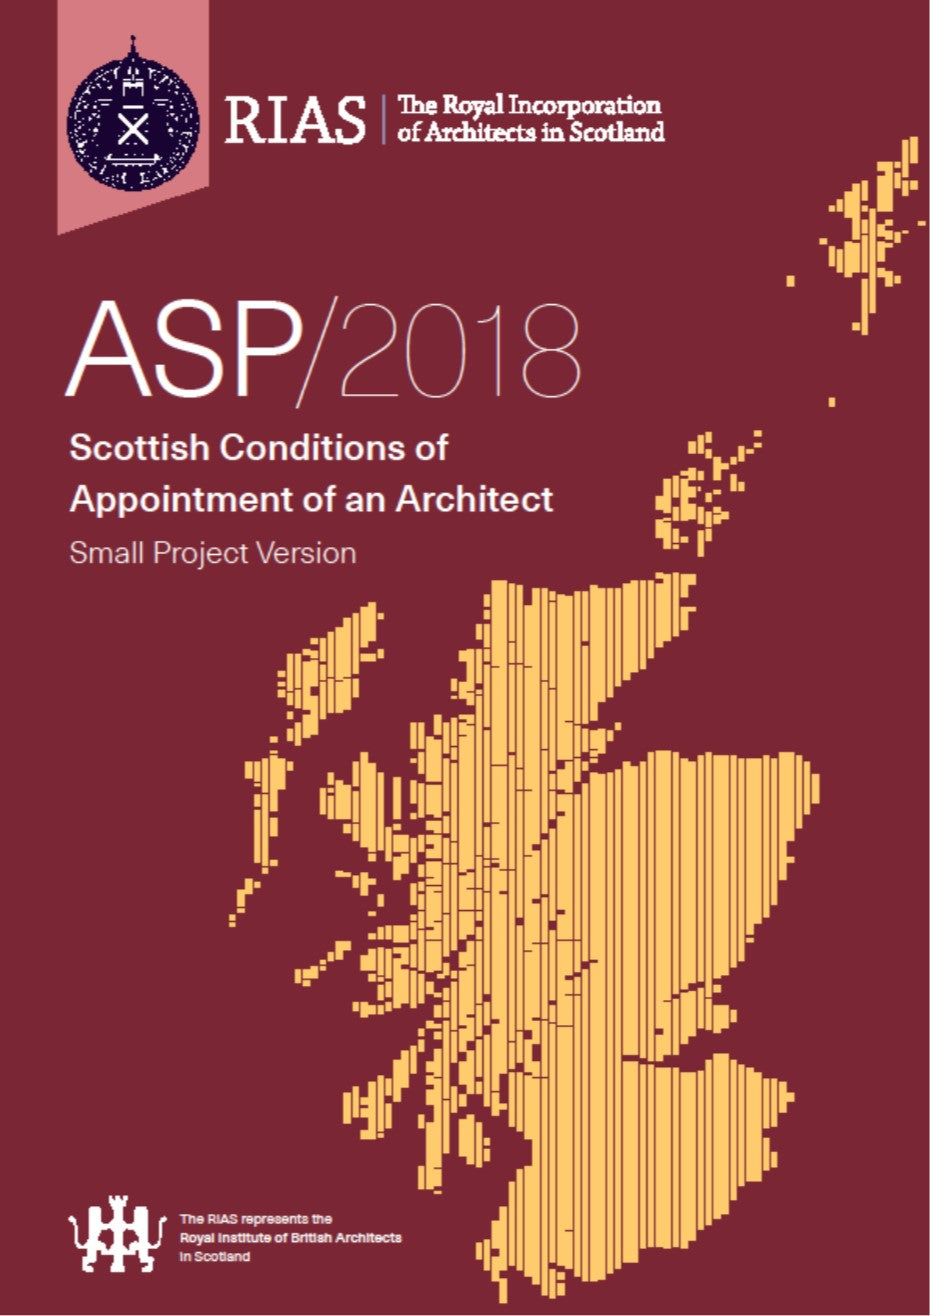 Scottish Conditions of Appointment of an Architect - Small Project Version ASP/2018